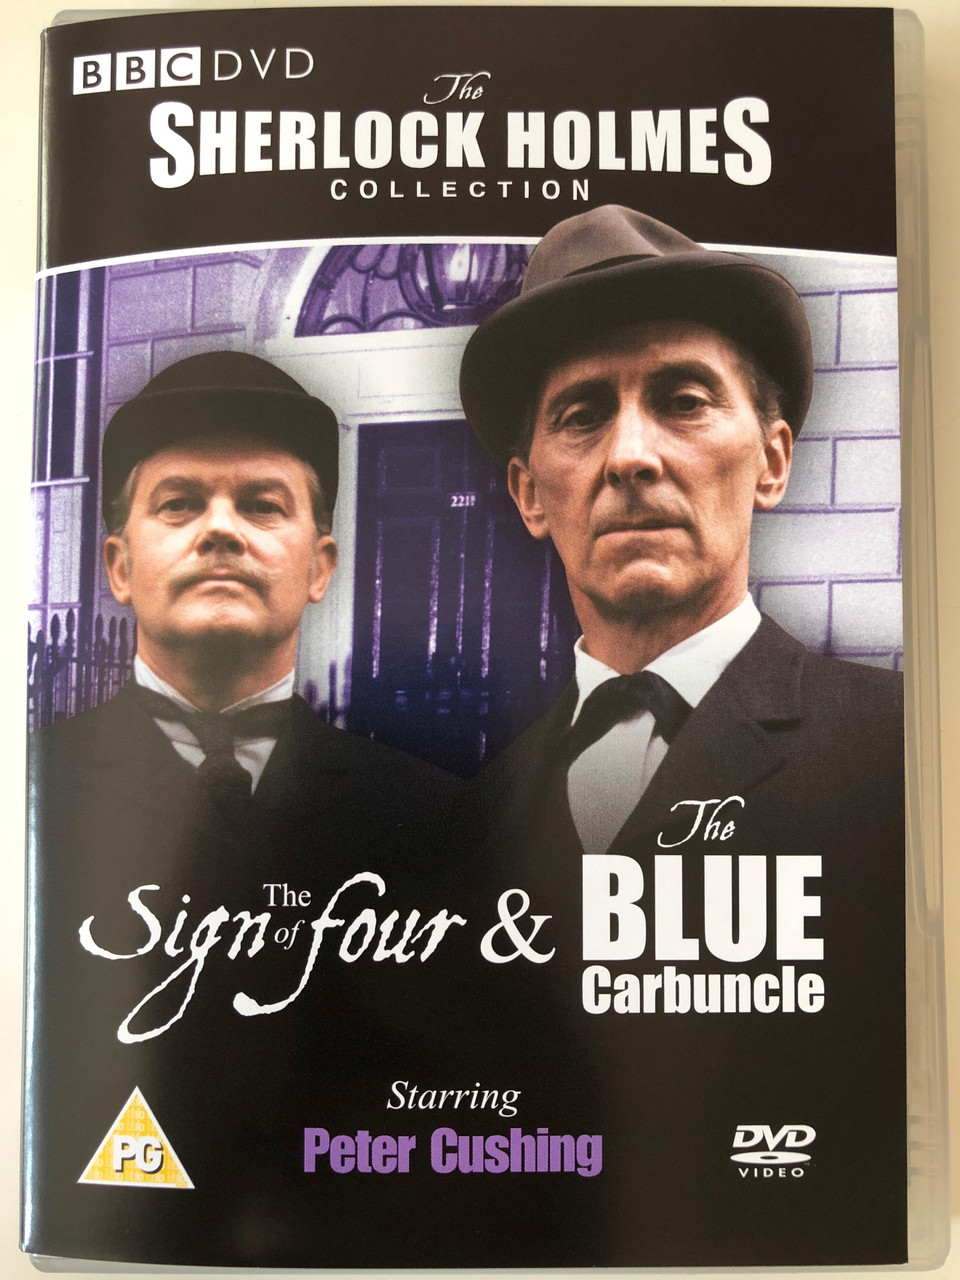 Sherlock Holmes Collection - The Sign of four & The Blue Carbuncle DVD 1968  BBC / Directed by William Sterling, Bill Bain / Starring: Peter Cushing,  Nigel Stock - bibleinmylanguage